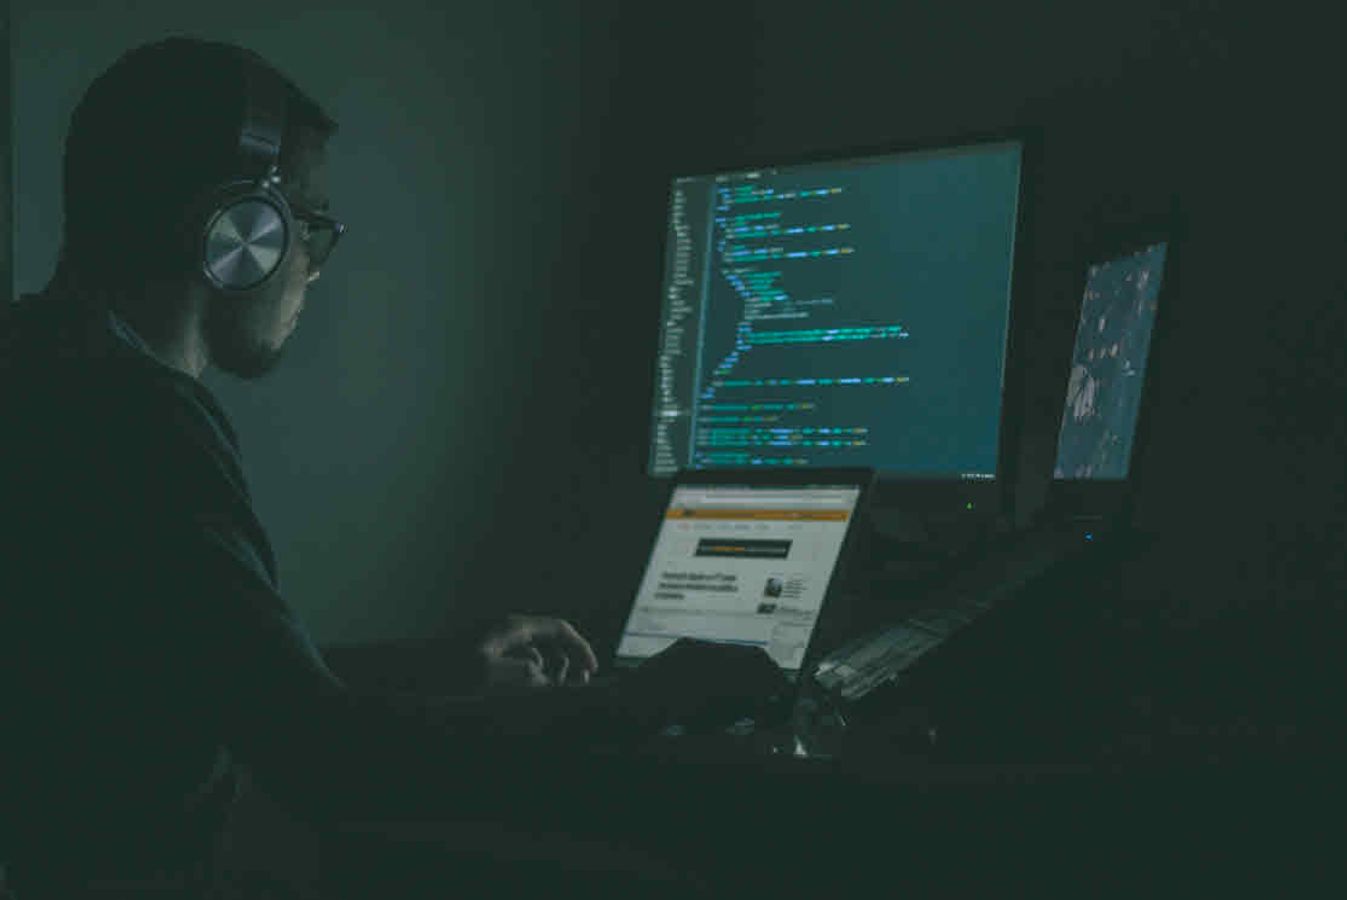 Don’t Let the Hackers Win: How State and Local Governments Can Avoid Cyber Attacks with Security Training